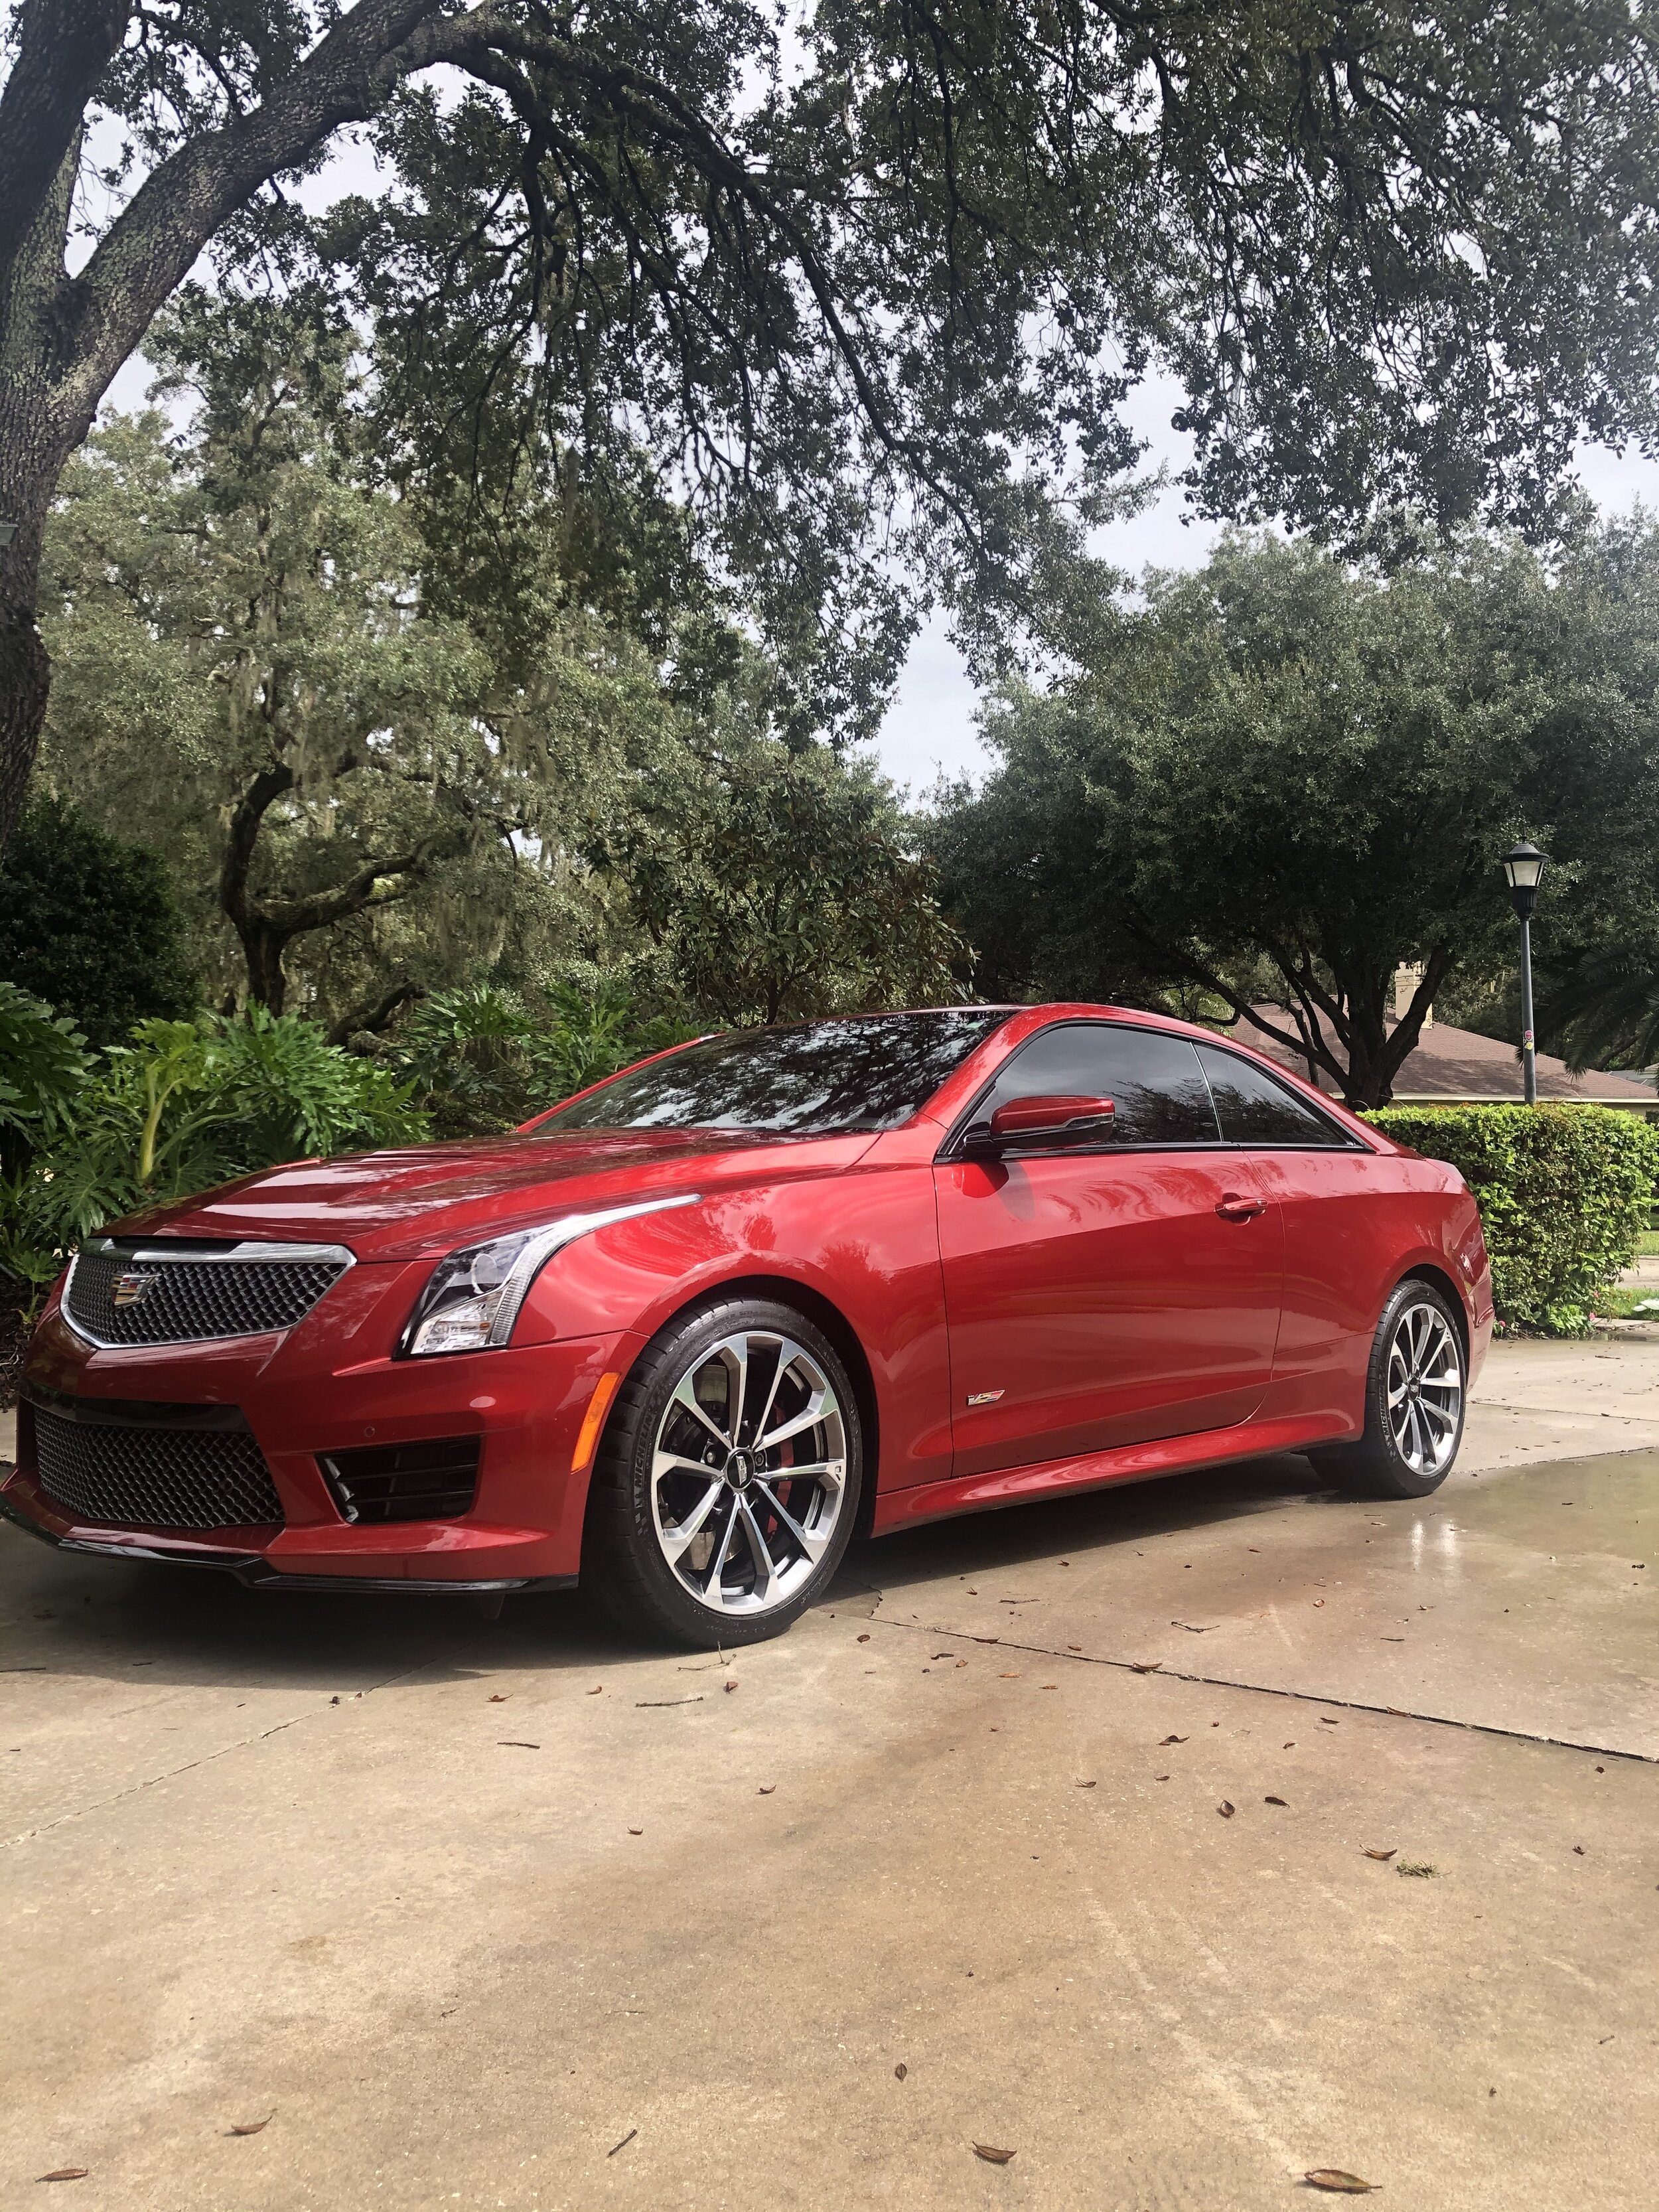 Mobile auto detailing service on a Cadillac ATS-V.